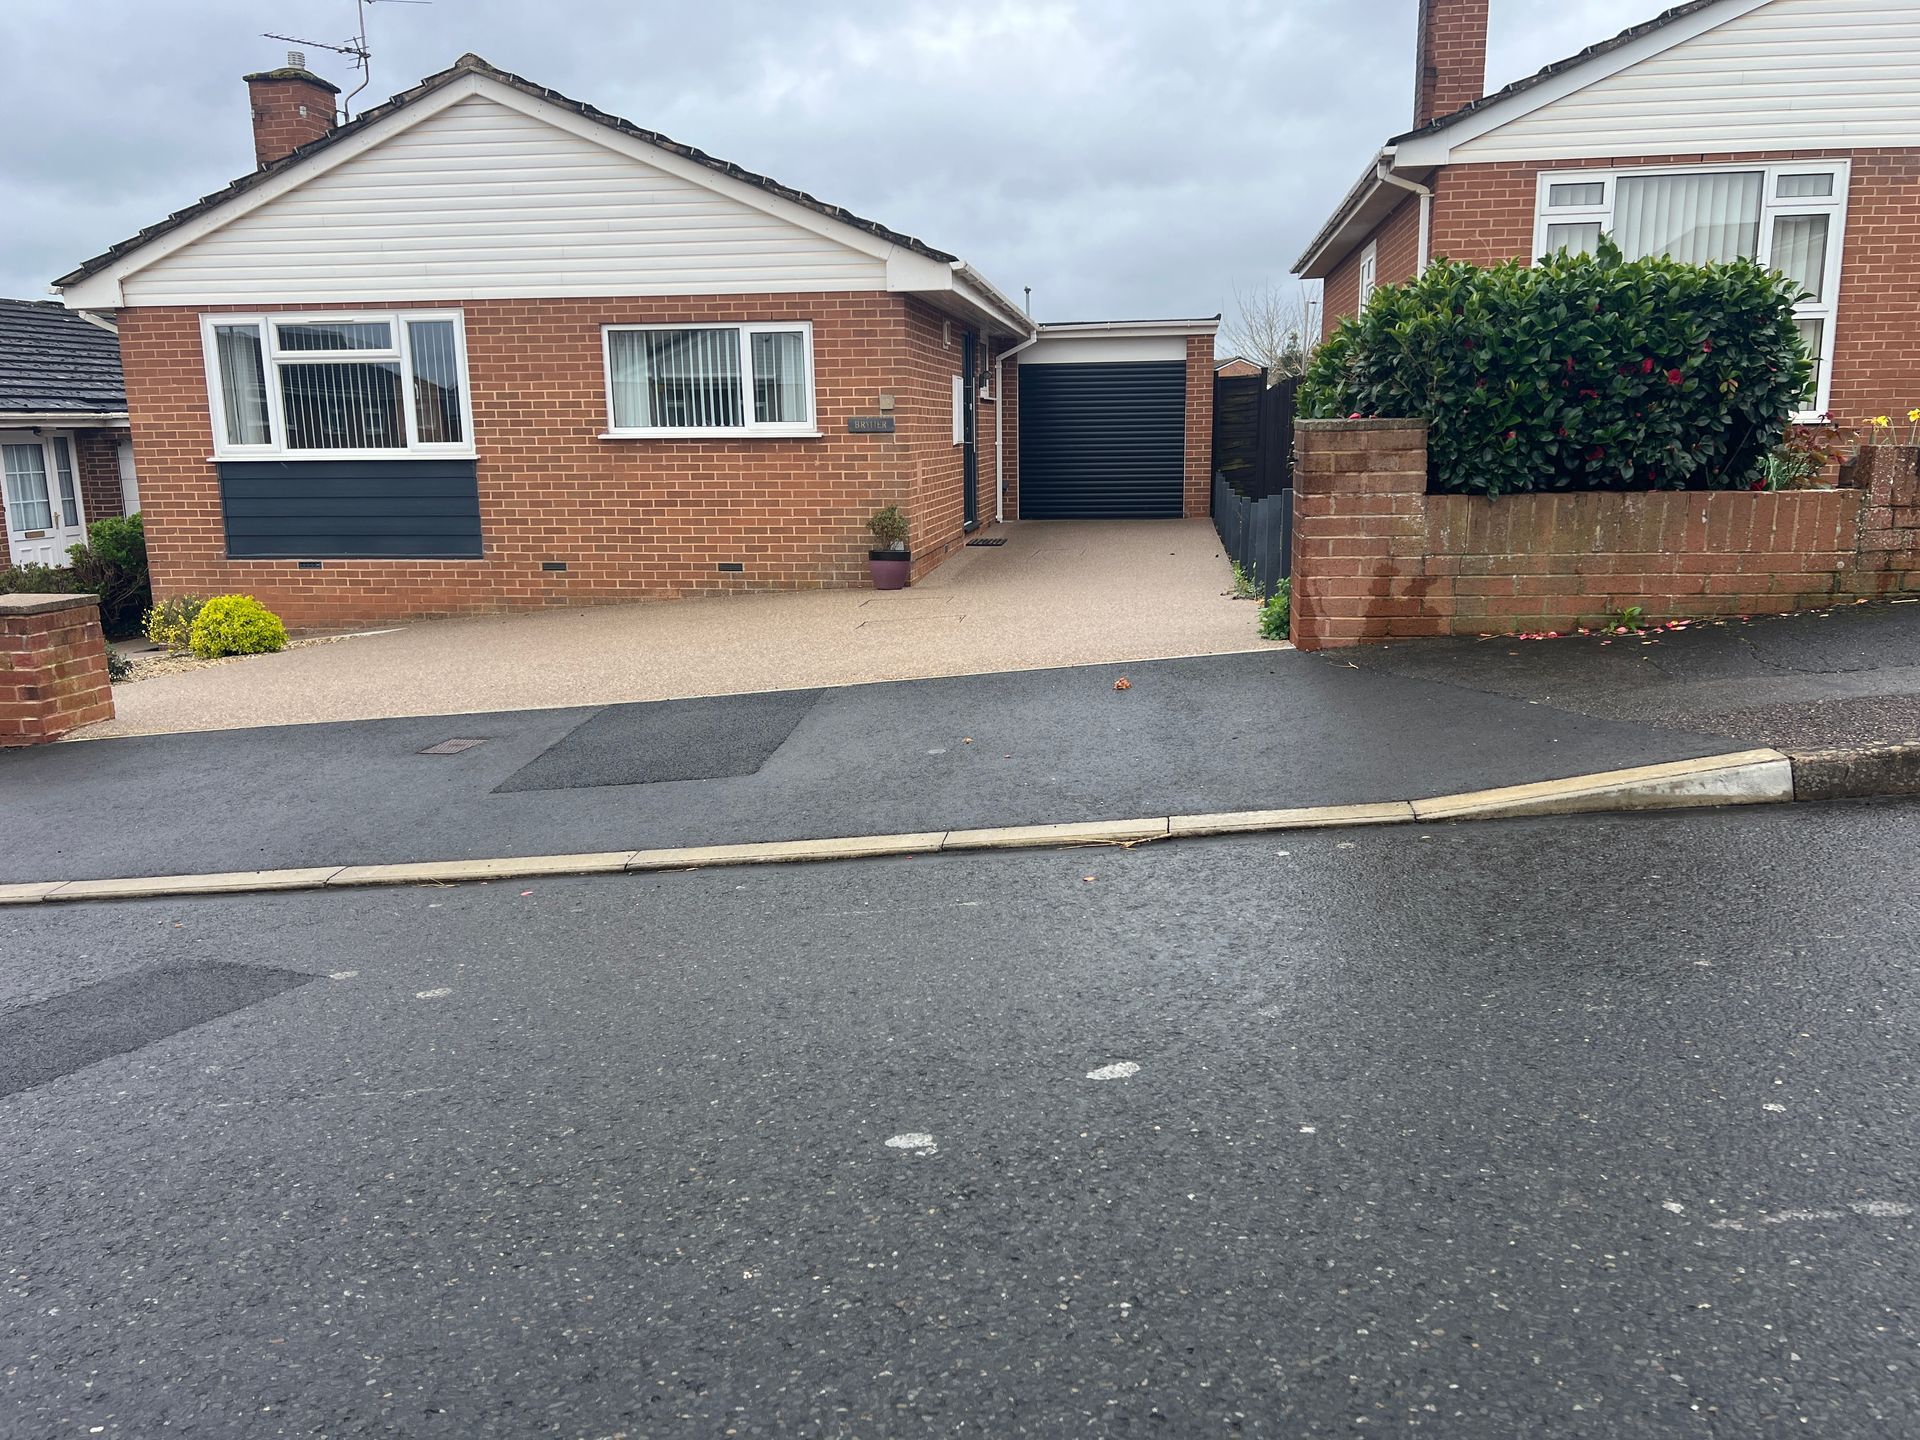 Small beige resin driveway installed outside a red brick bungalow.